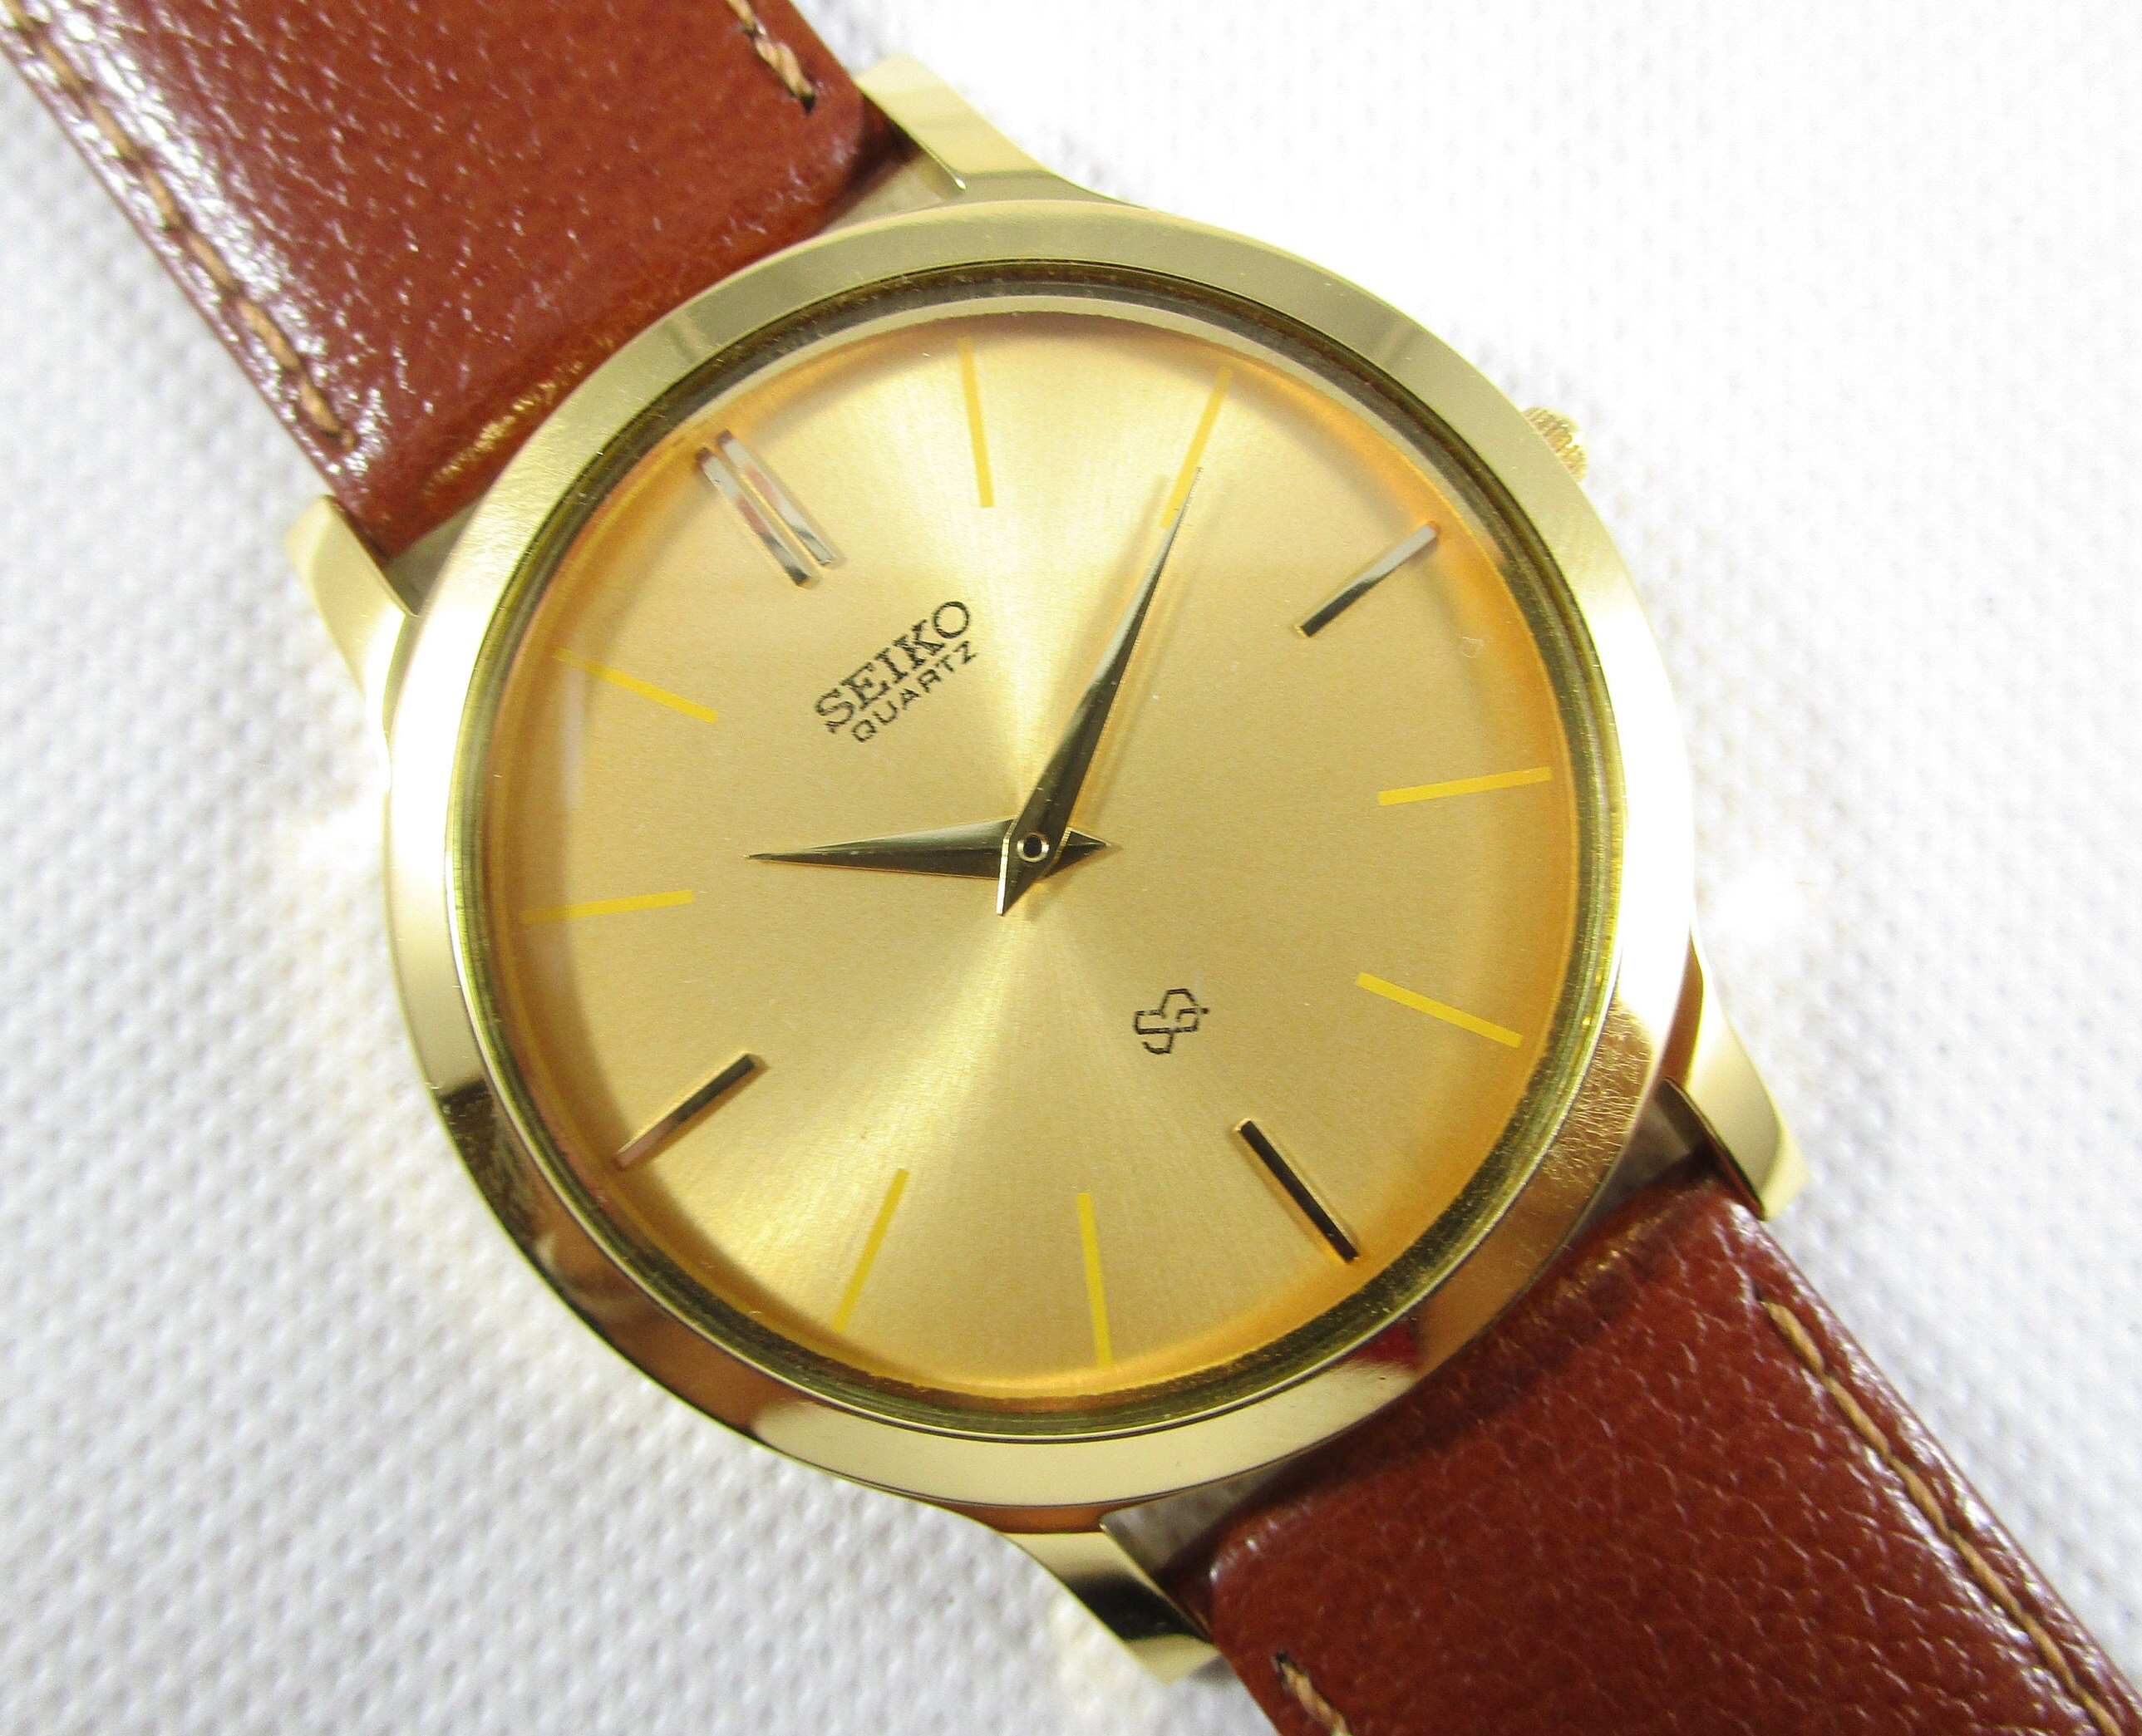 Buy Seiko Square Watch Online In India - Etsy India